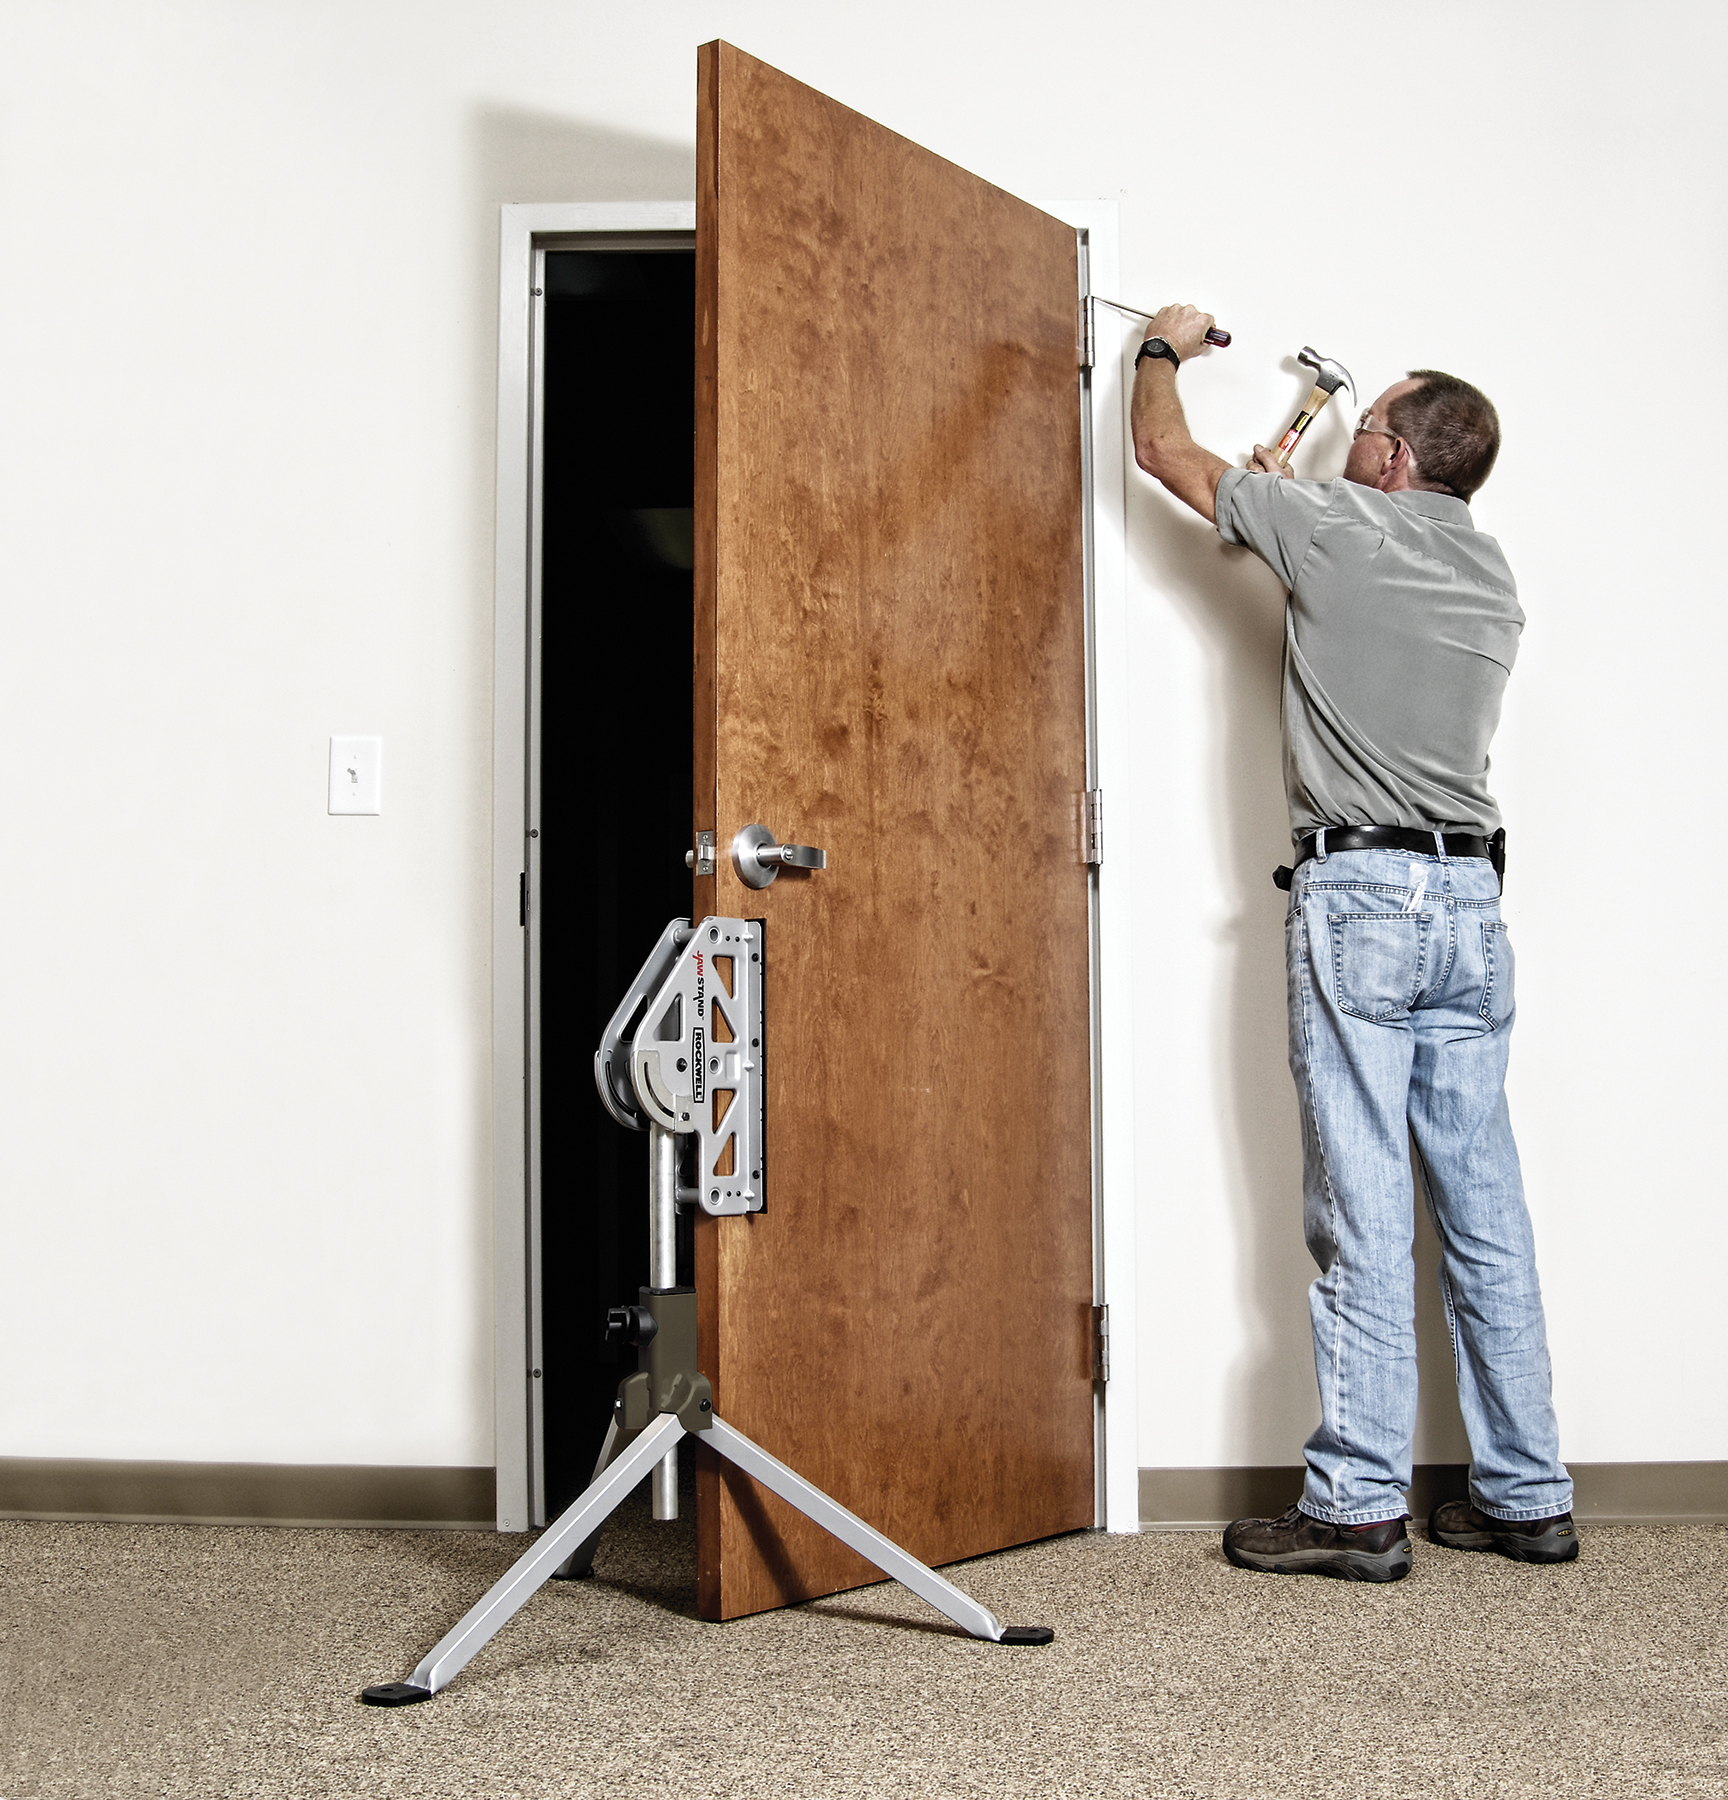 Rockwell JawStand XP supports door installation